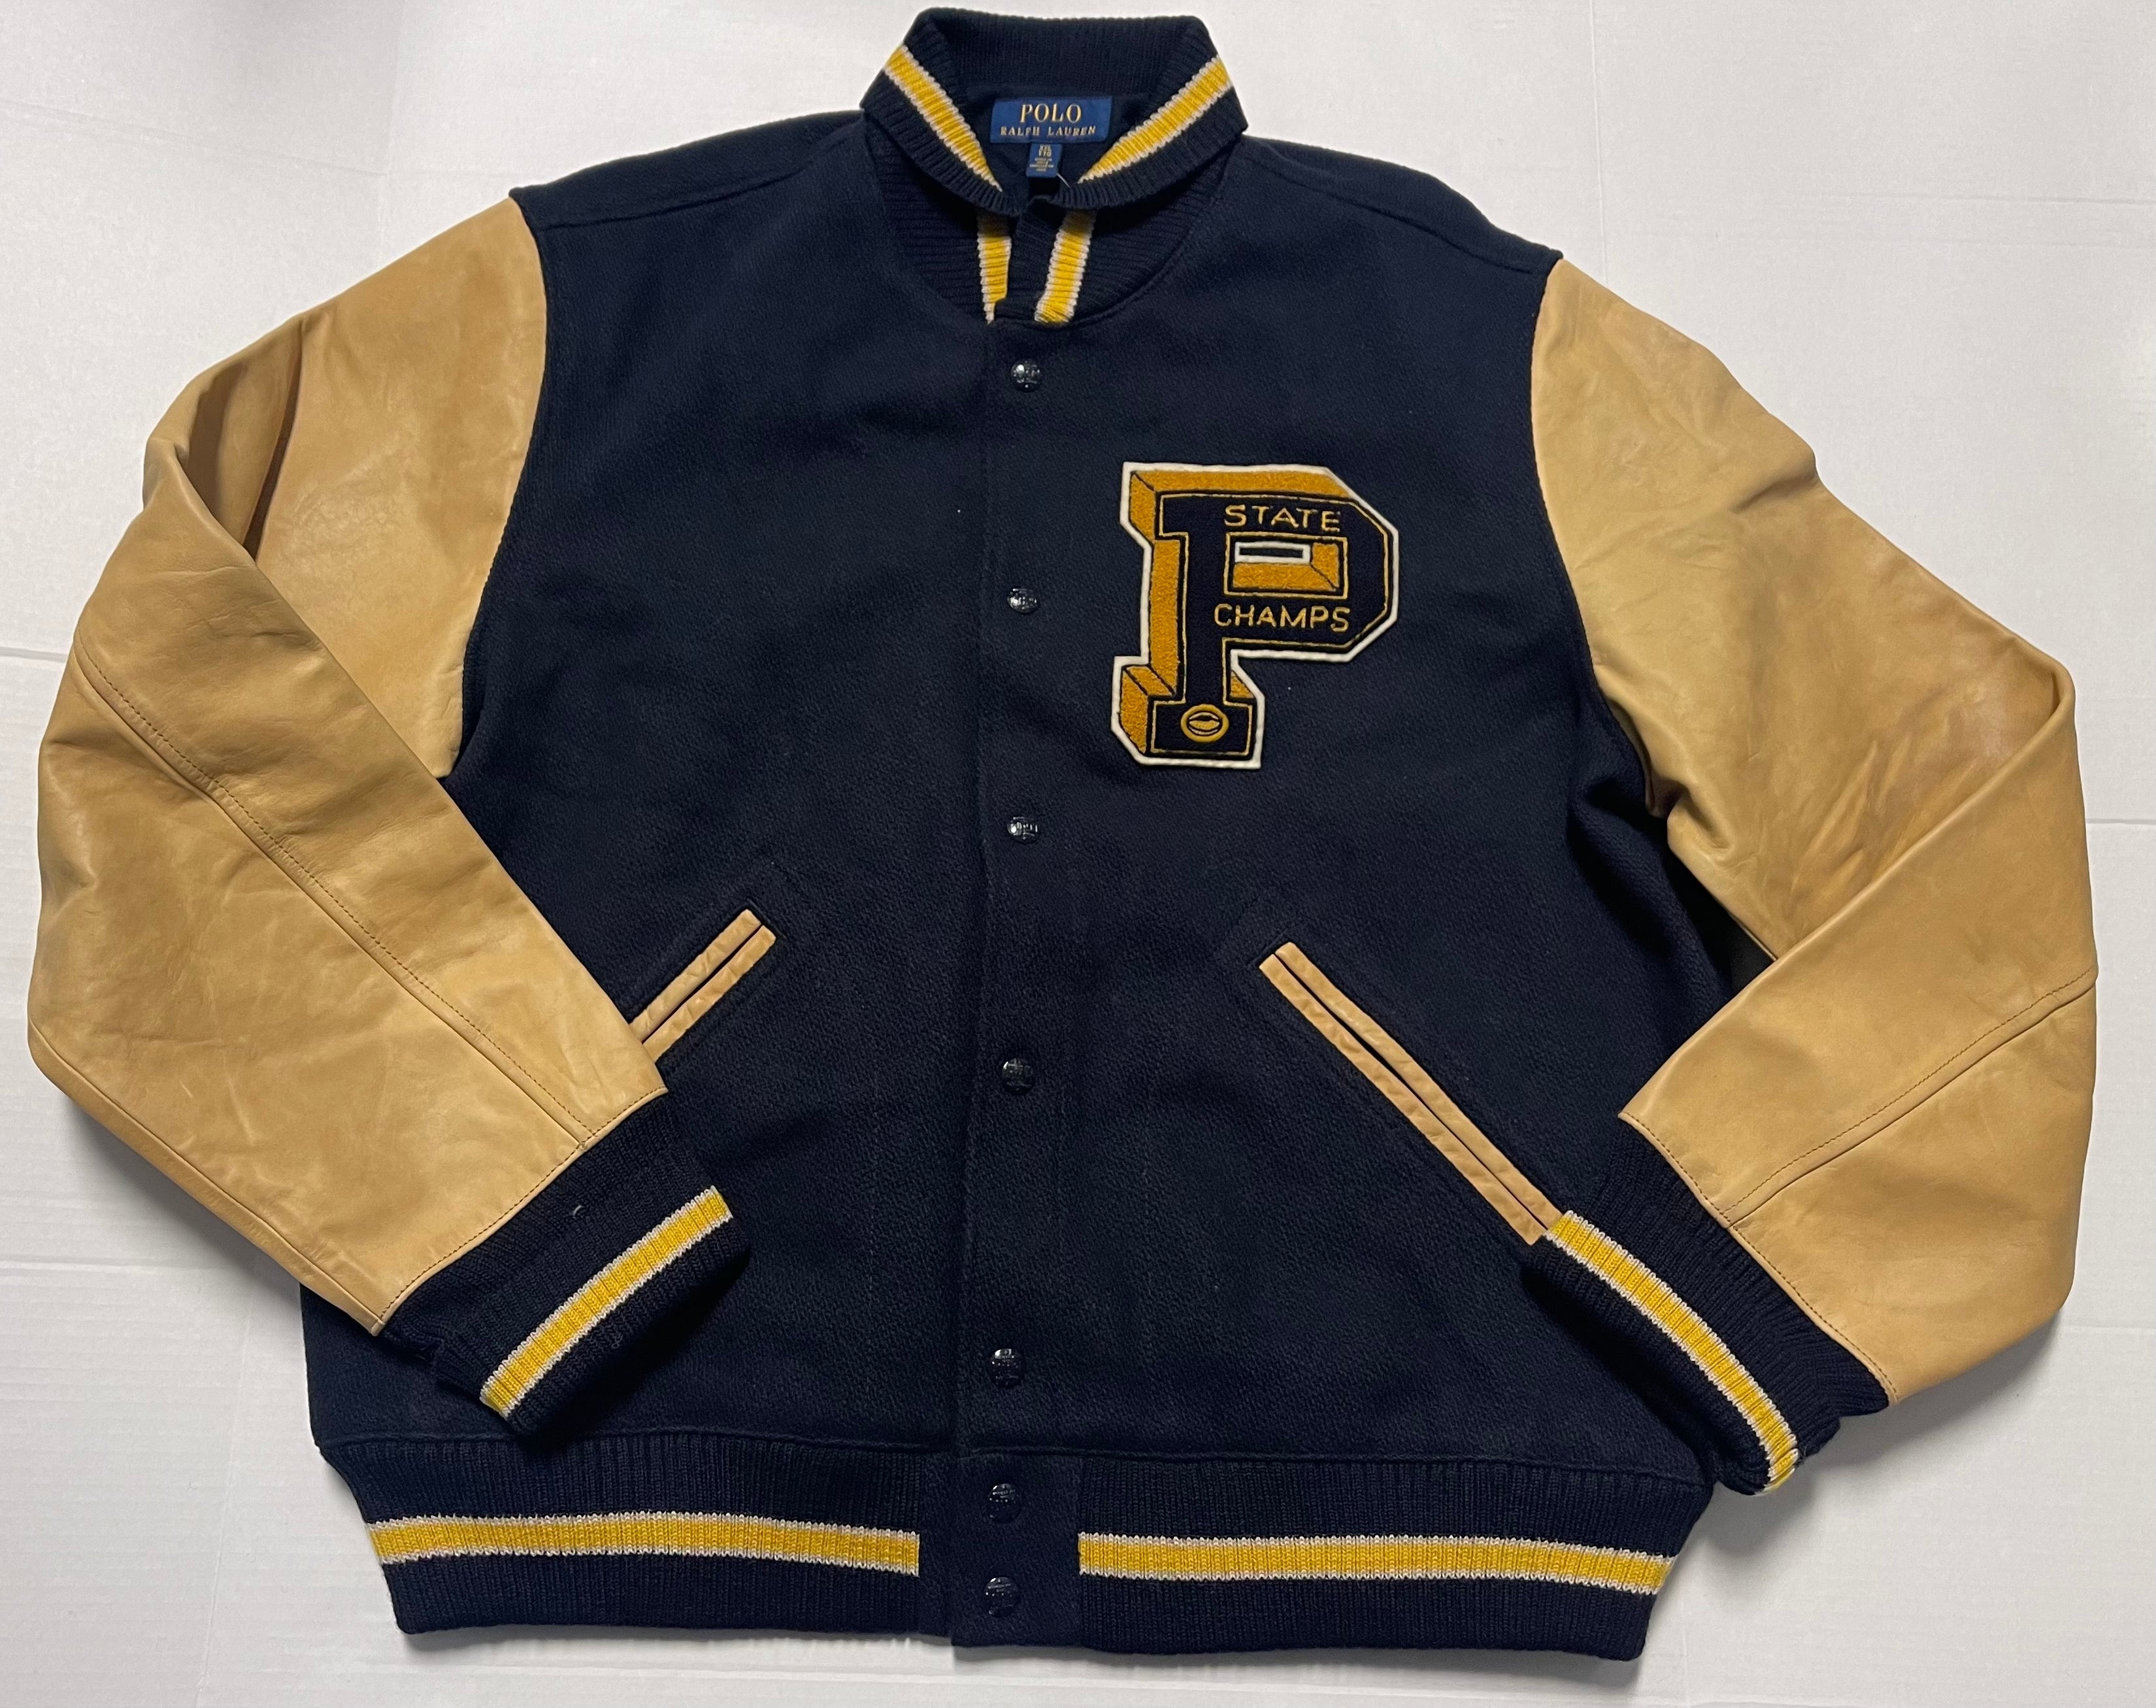 Nwt Polo Ralph Lauren Navy P State Champs Patch Varsity Jacket